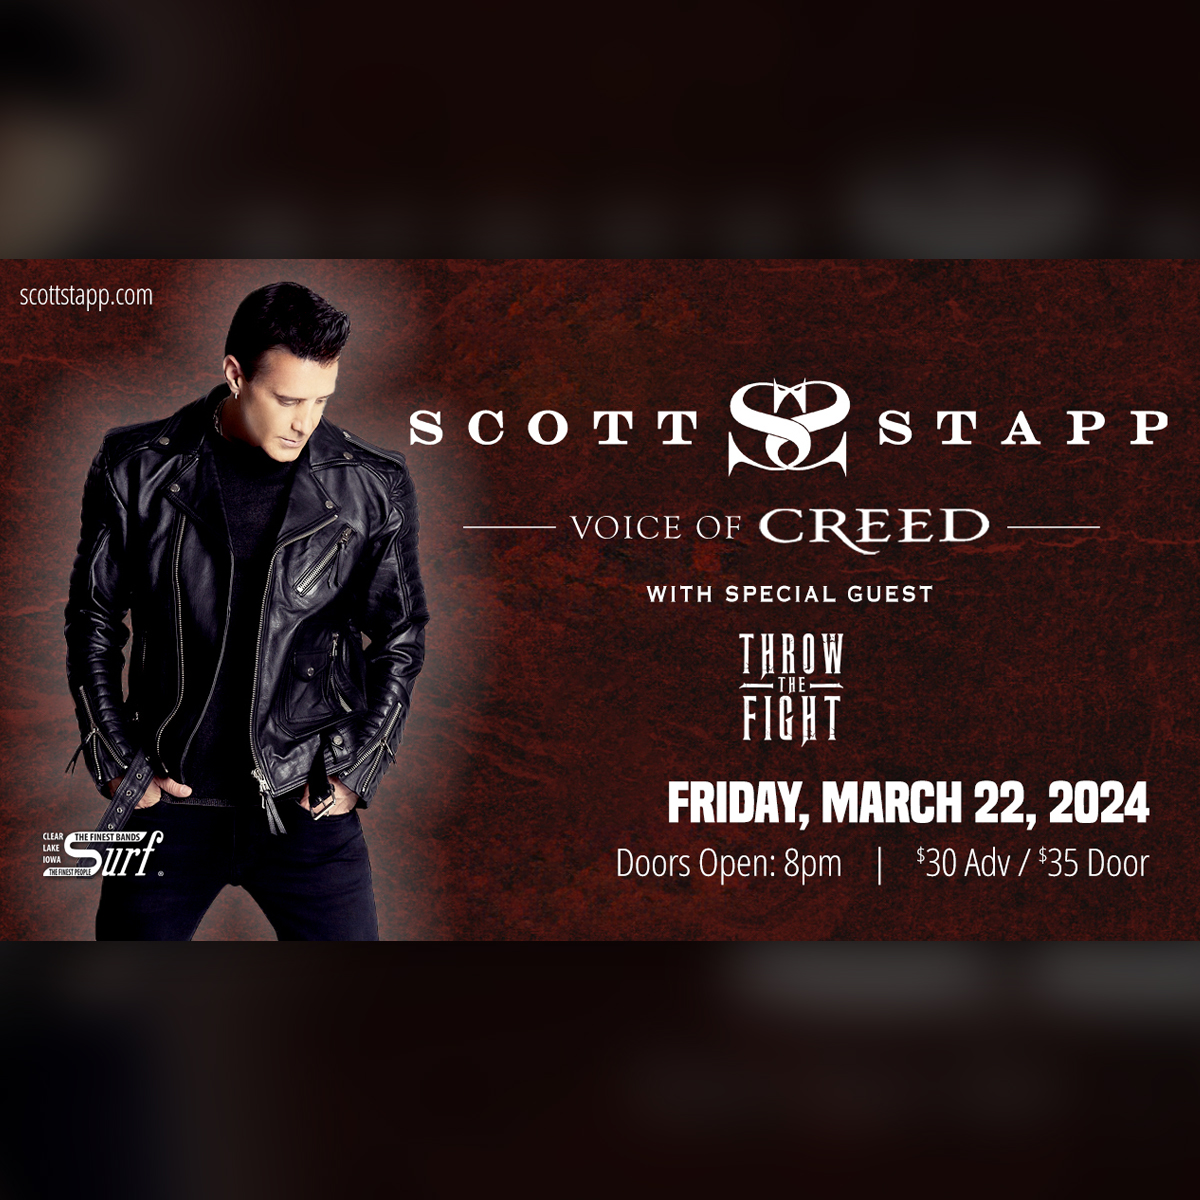 We're blowing the roof off one of our favorite venues, The @SurfBallroom, in Clear Lake, IA, with @ScottStapp this Friday, March 22nd! 🔥

🎟️ Get tickets here: surfballroom.com